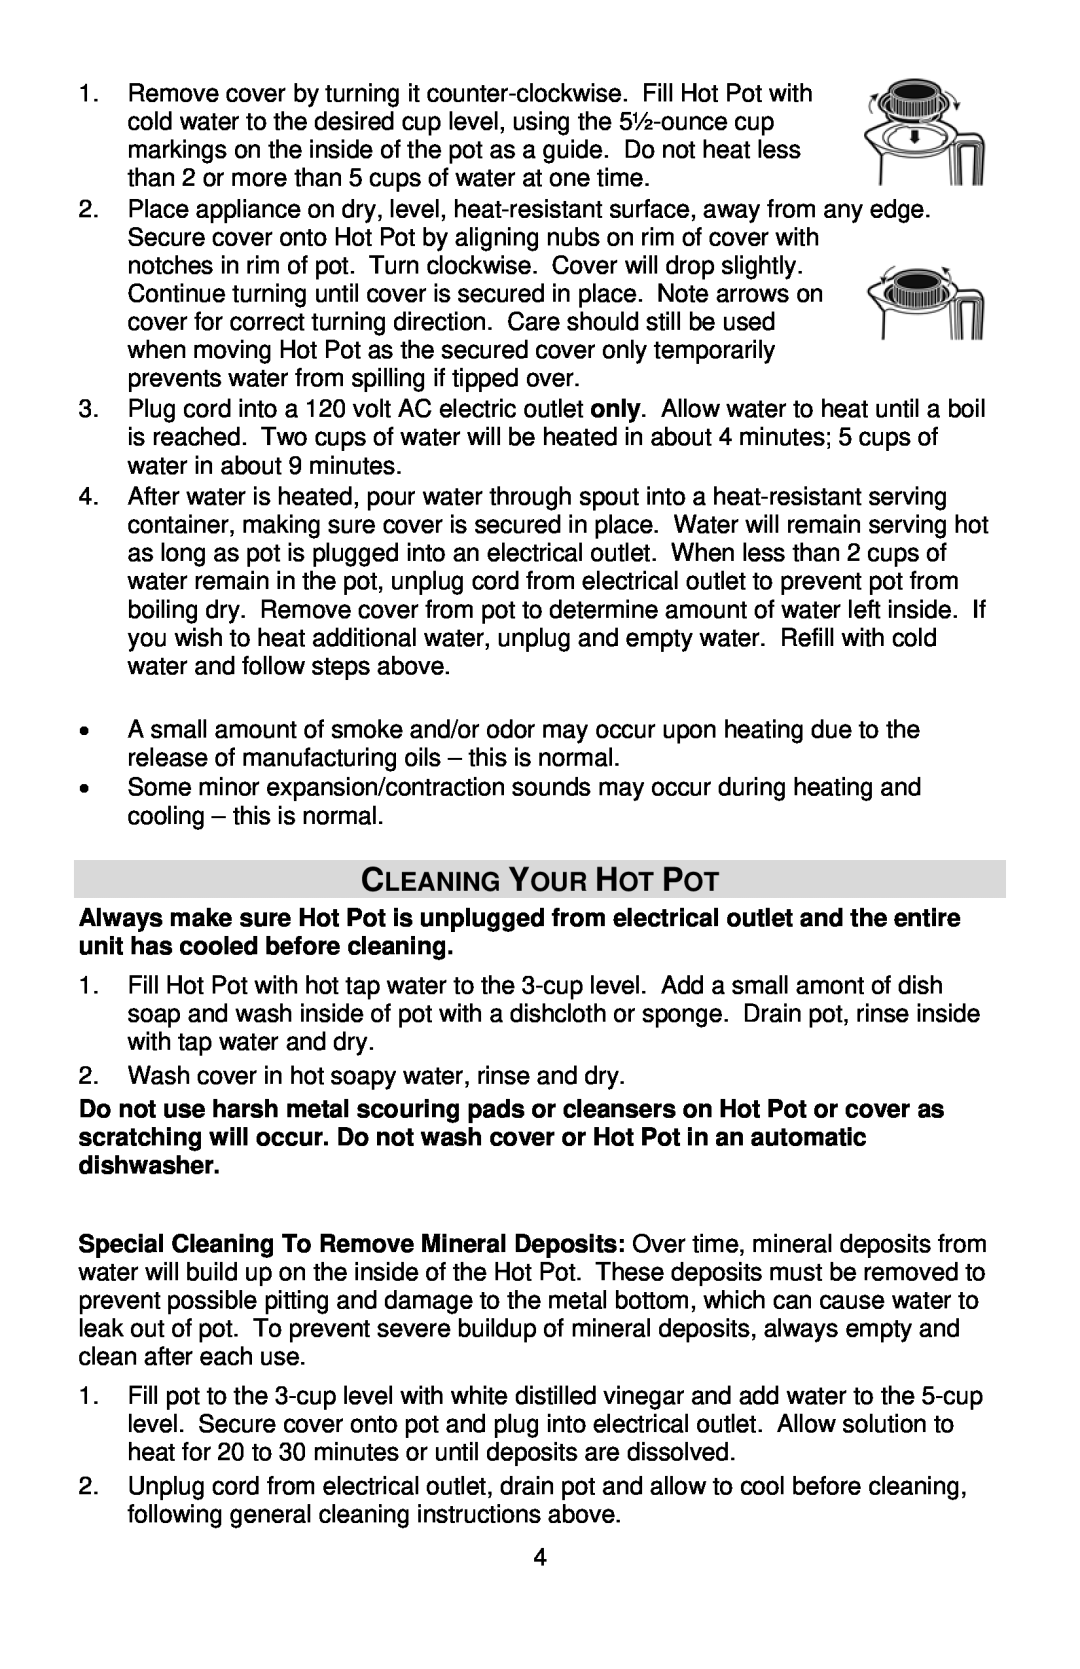 West Bend Electric Hot Pot instruction manual Cleaning Your Hot Pot 